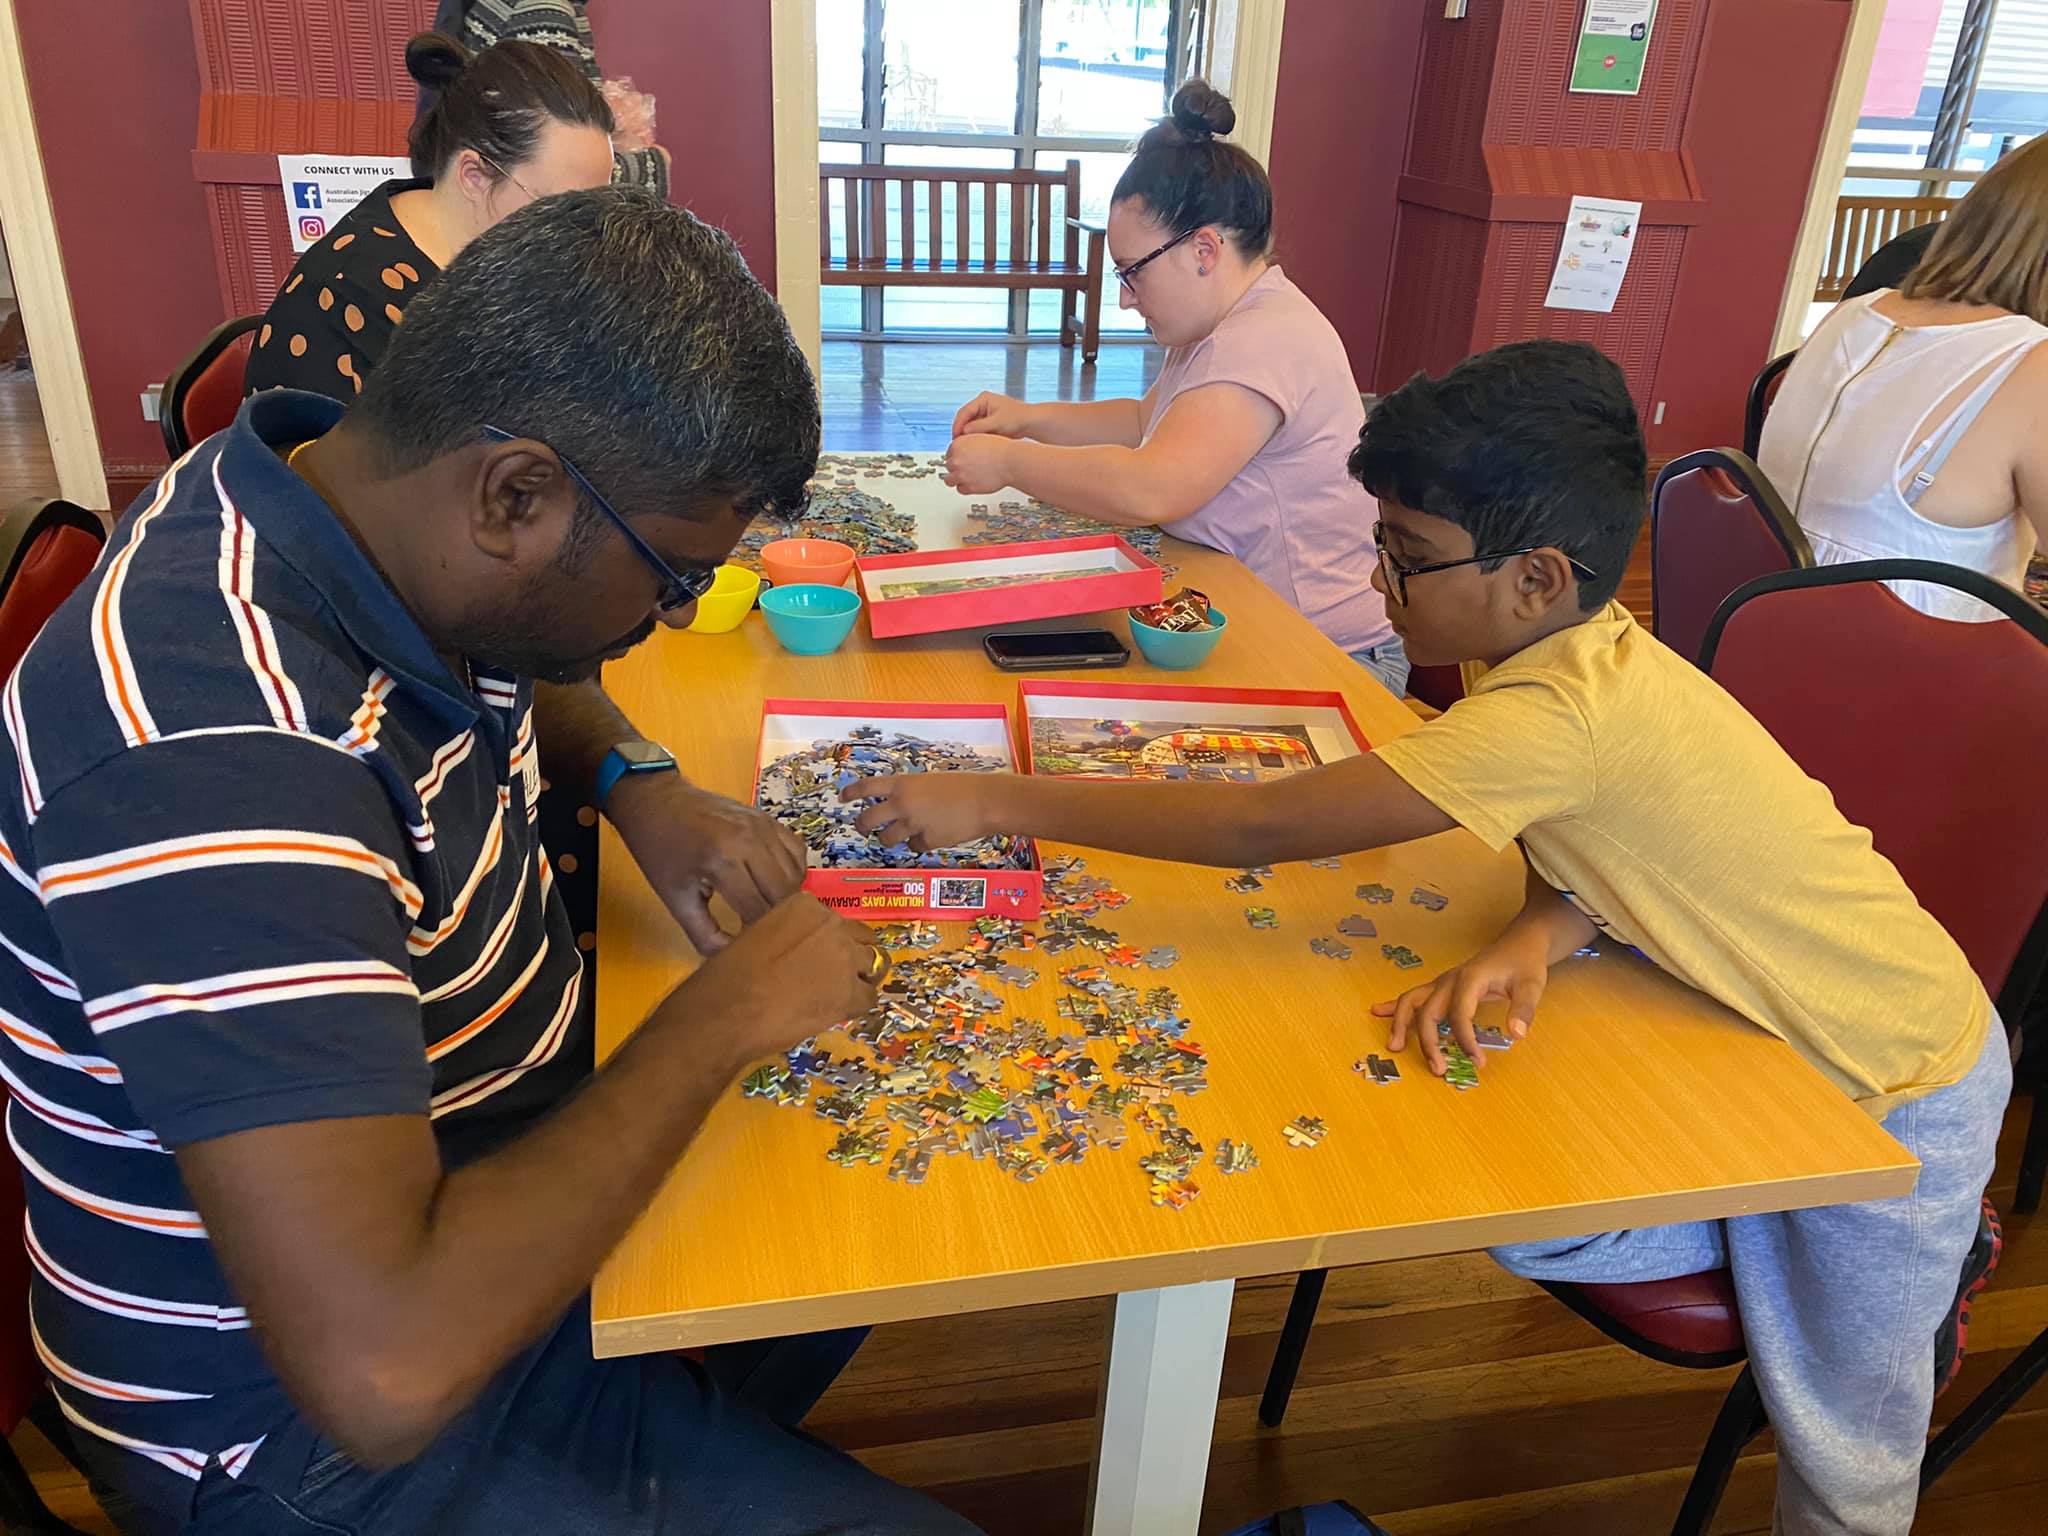 A man and his son sort and do a puzzle on a table as part of a competition